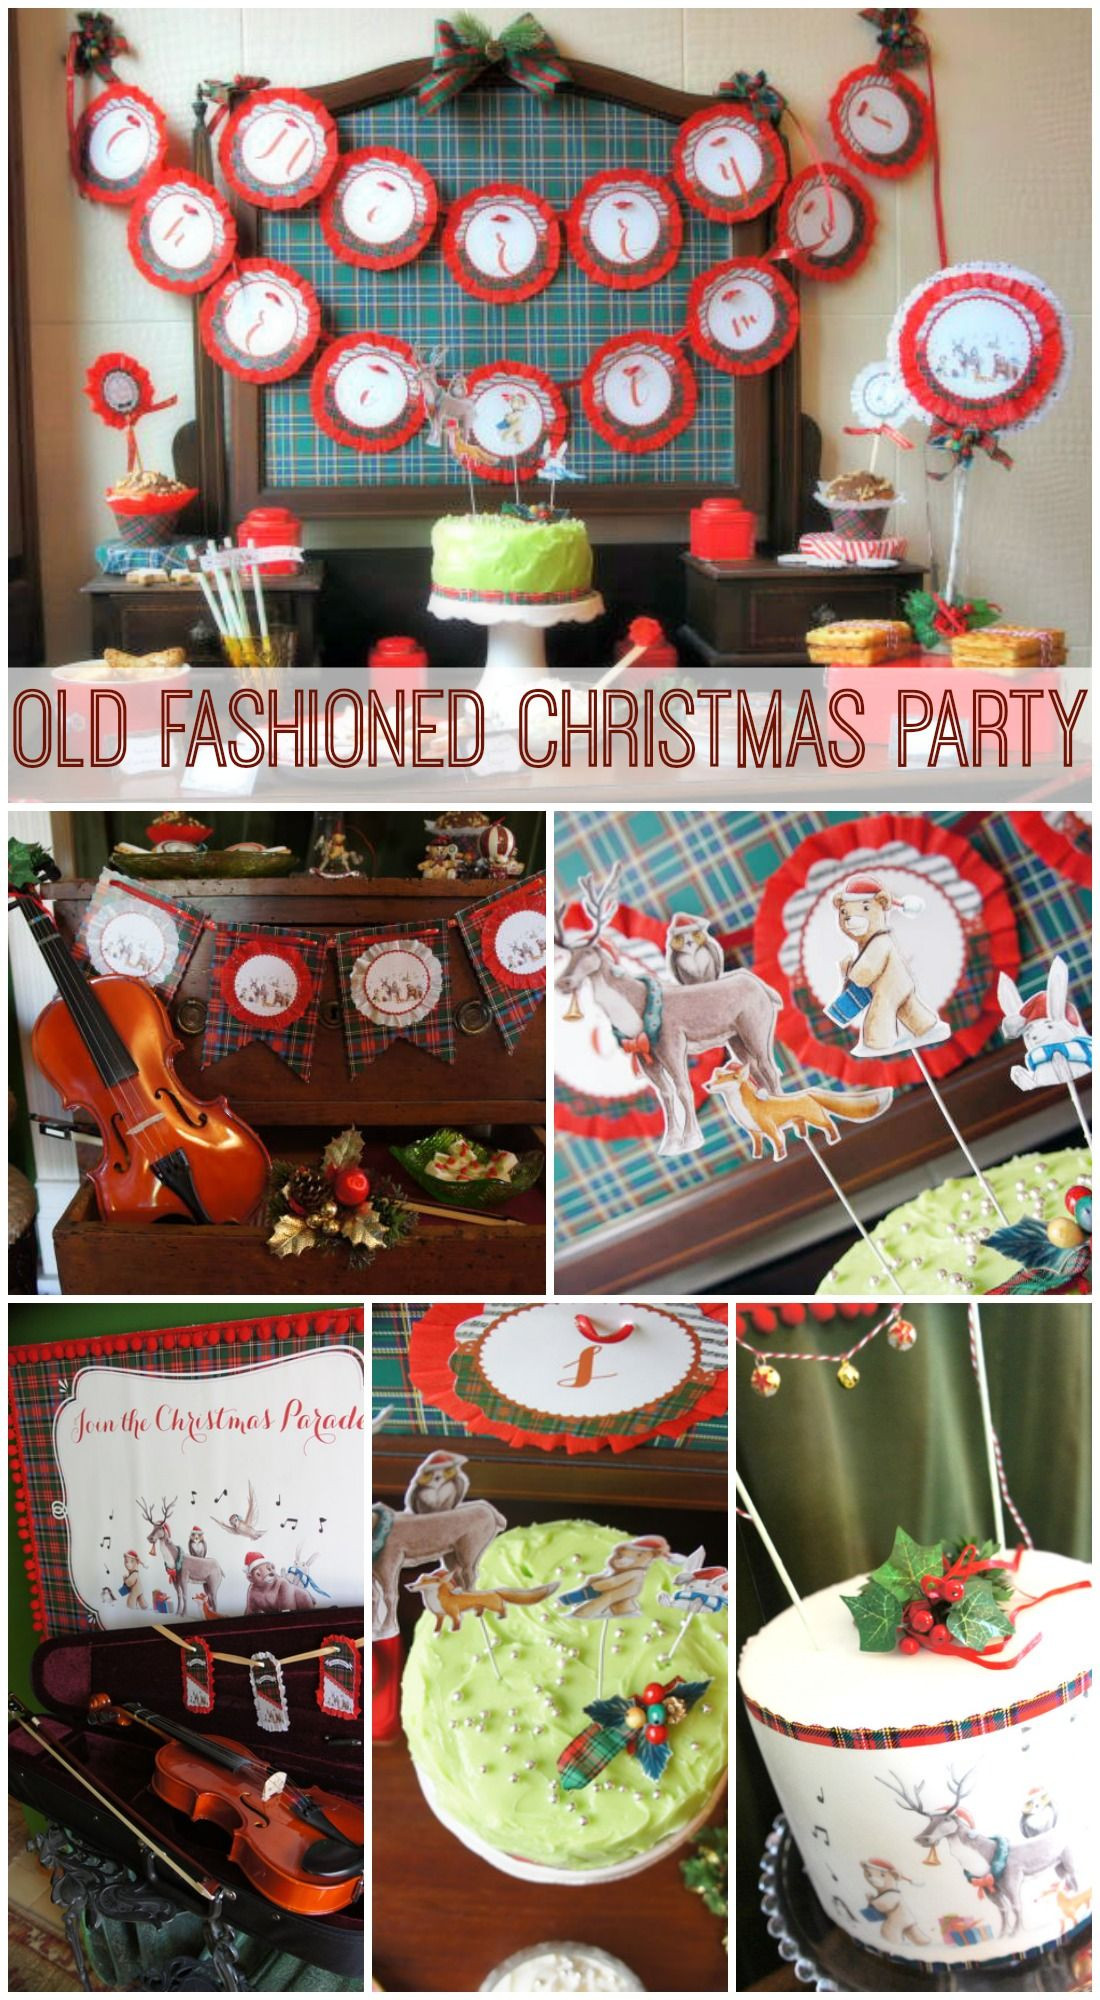 Old Fashioned Christmas Party Ideas
 Lots of great ideas for throwing and old fashioned